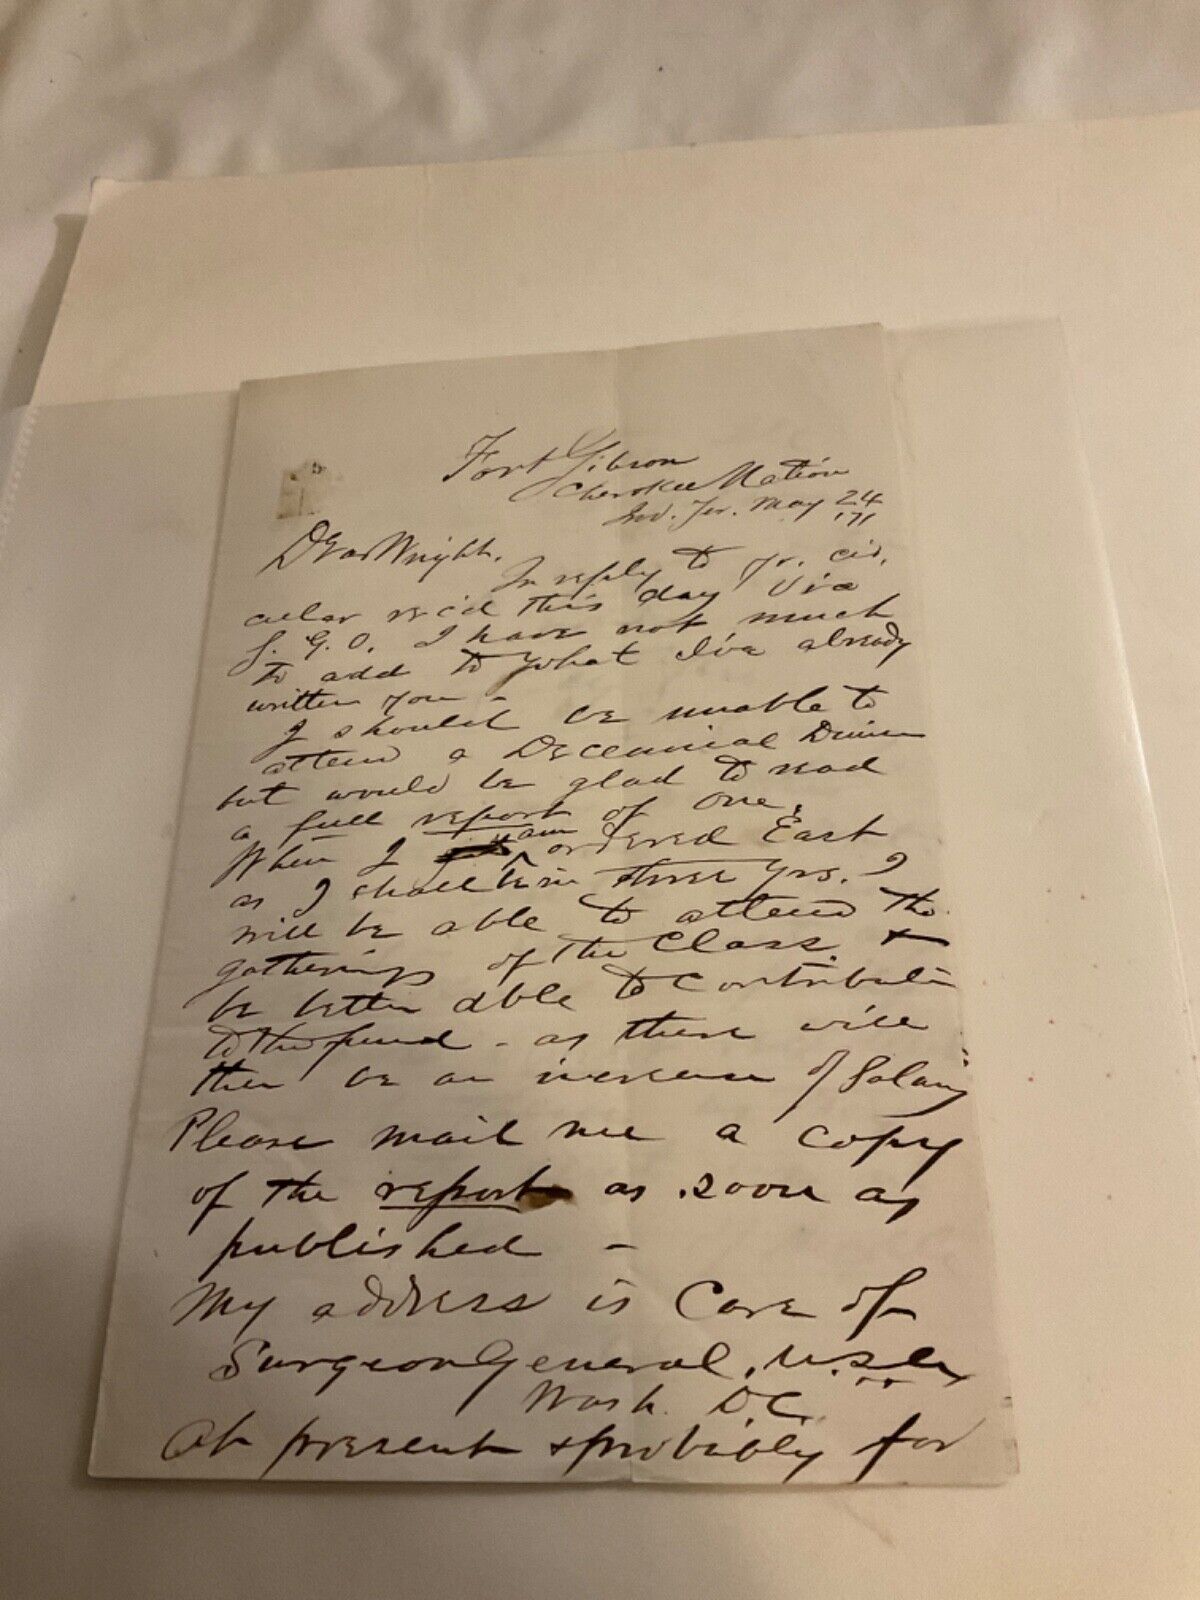 FORT GIBSON CHEROKEE NATION INDIAN TERRITORY MAY 1871 ARMY SURGEON LETTER 1704